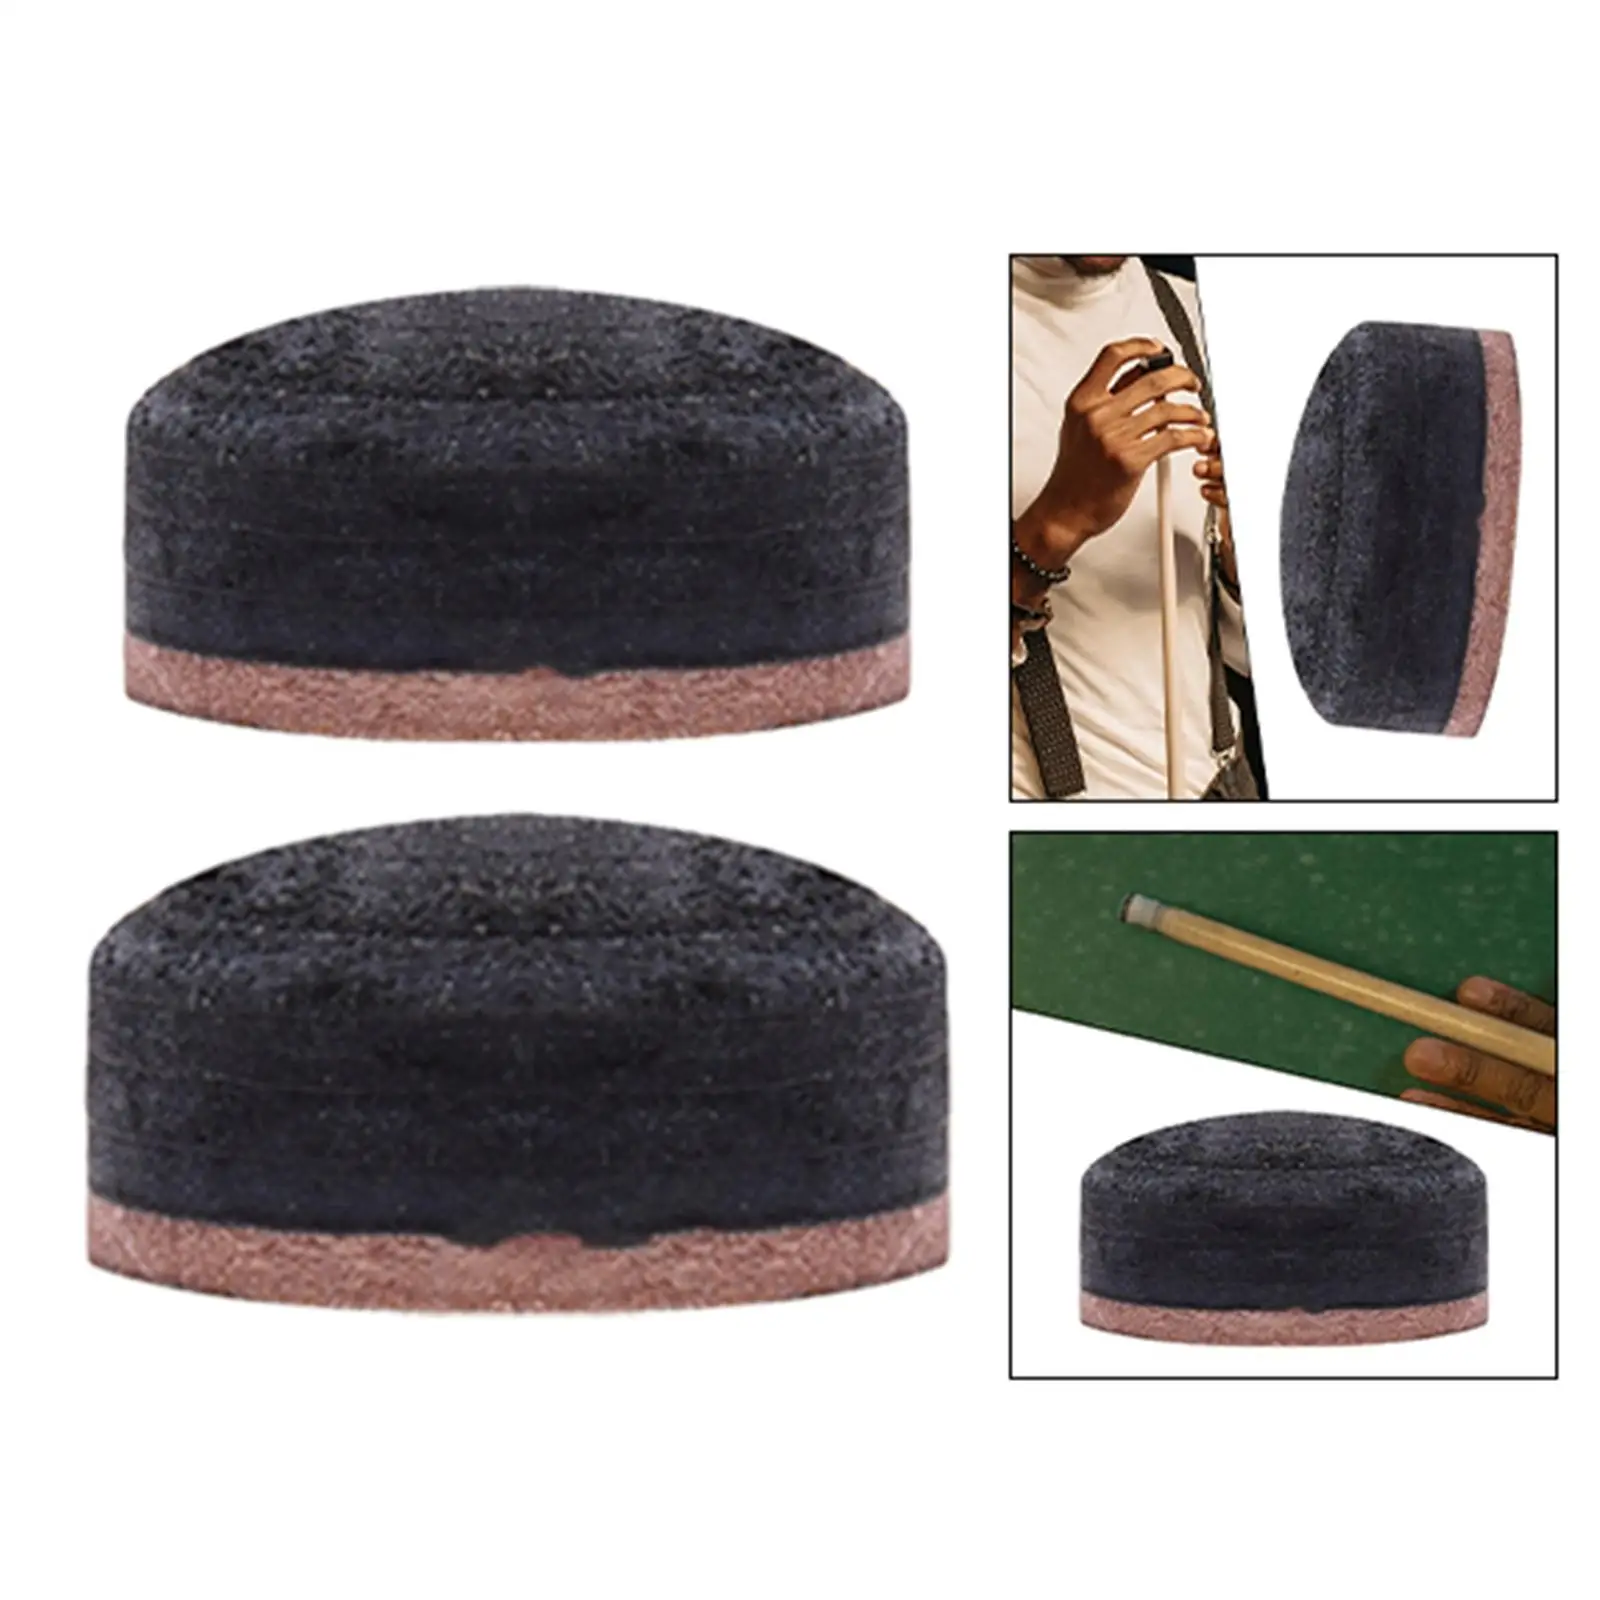 PU Leather Pool Cue Tip Glue On Tip Billiards Accessory Easy Maintain